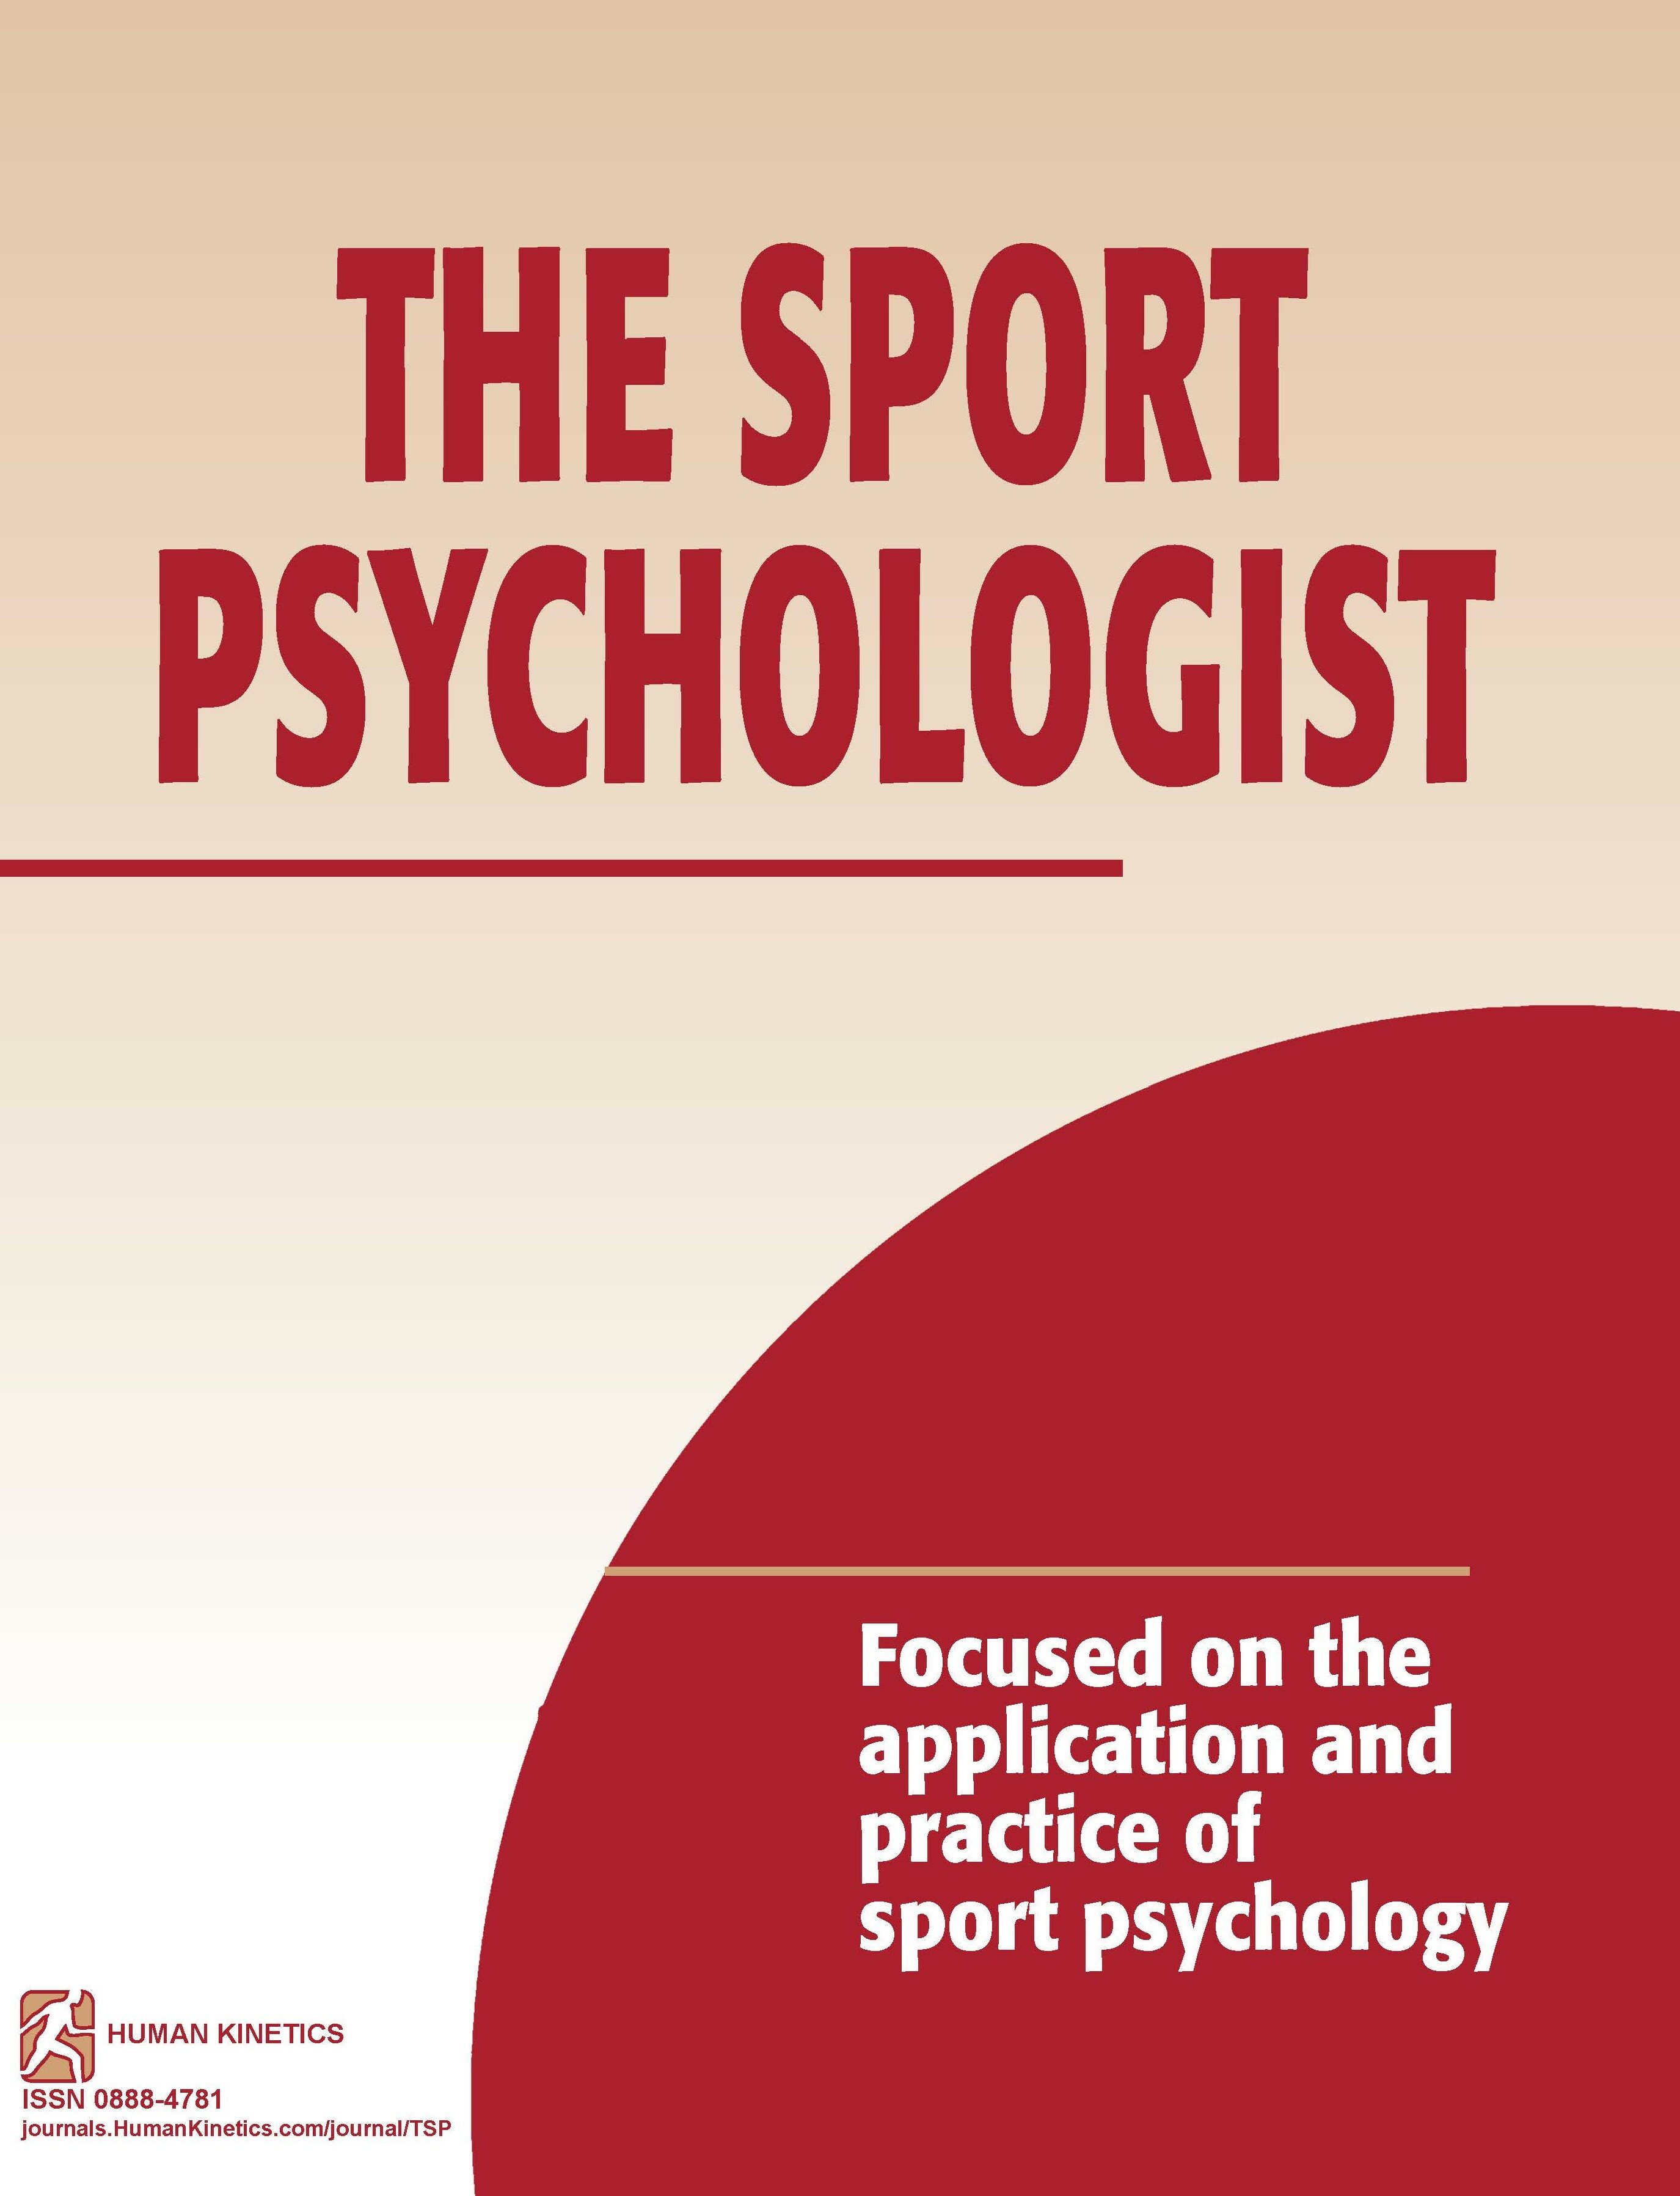 Australian Football Coaches’ Tales of Mental Toughness: Exploring the Sociocultural Roots